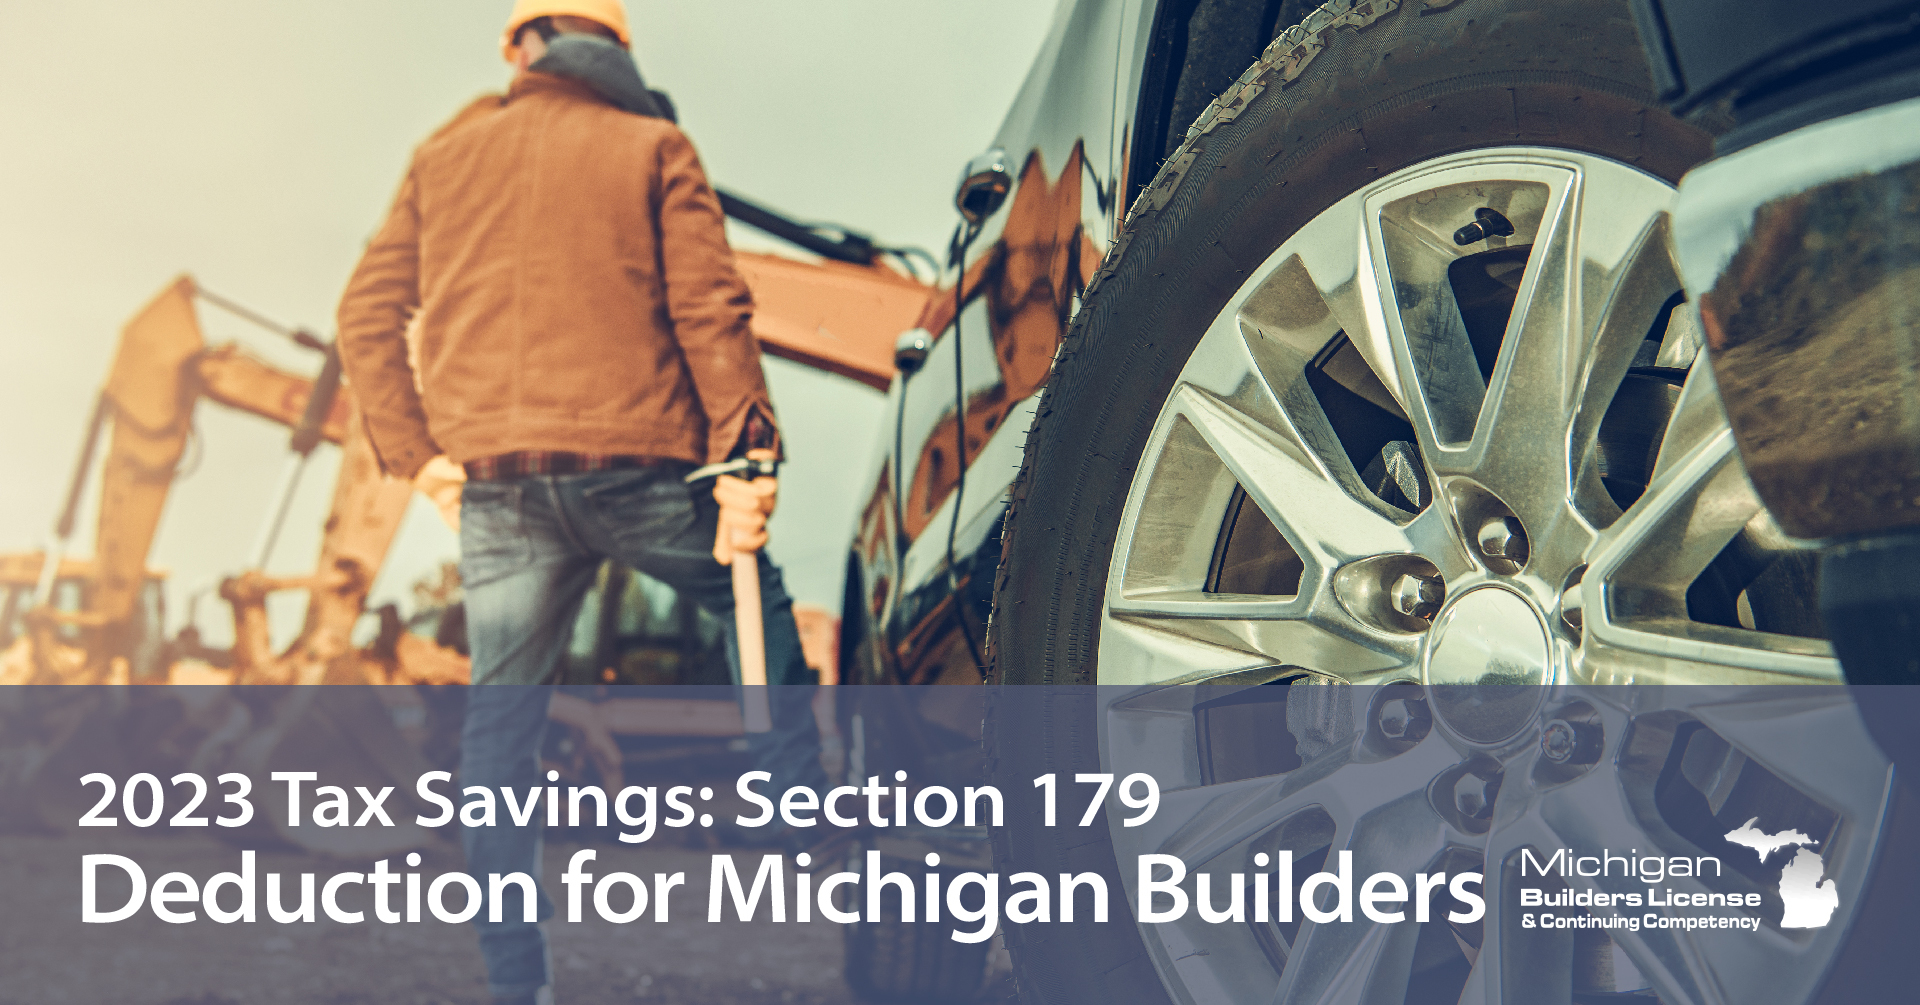 2023 Tax Savings: Section 179 Deduction for Michigan Builders